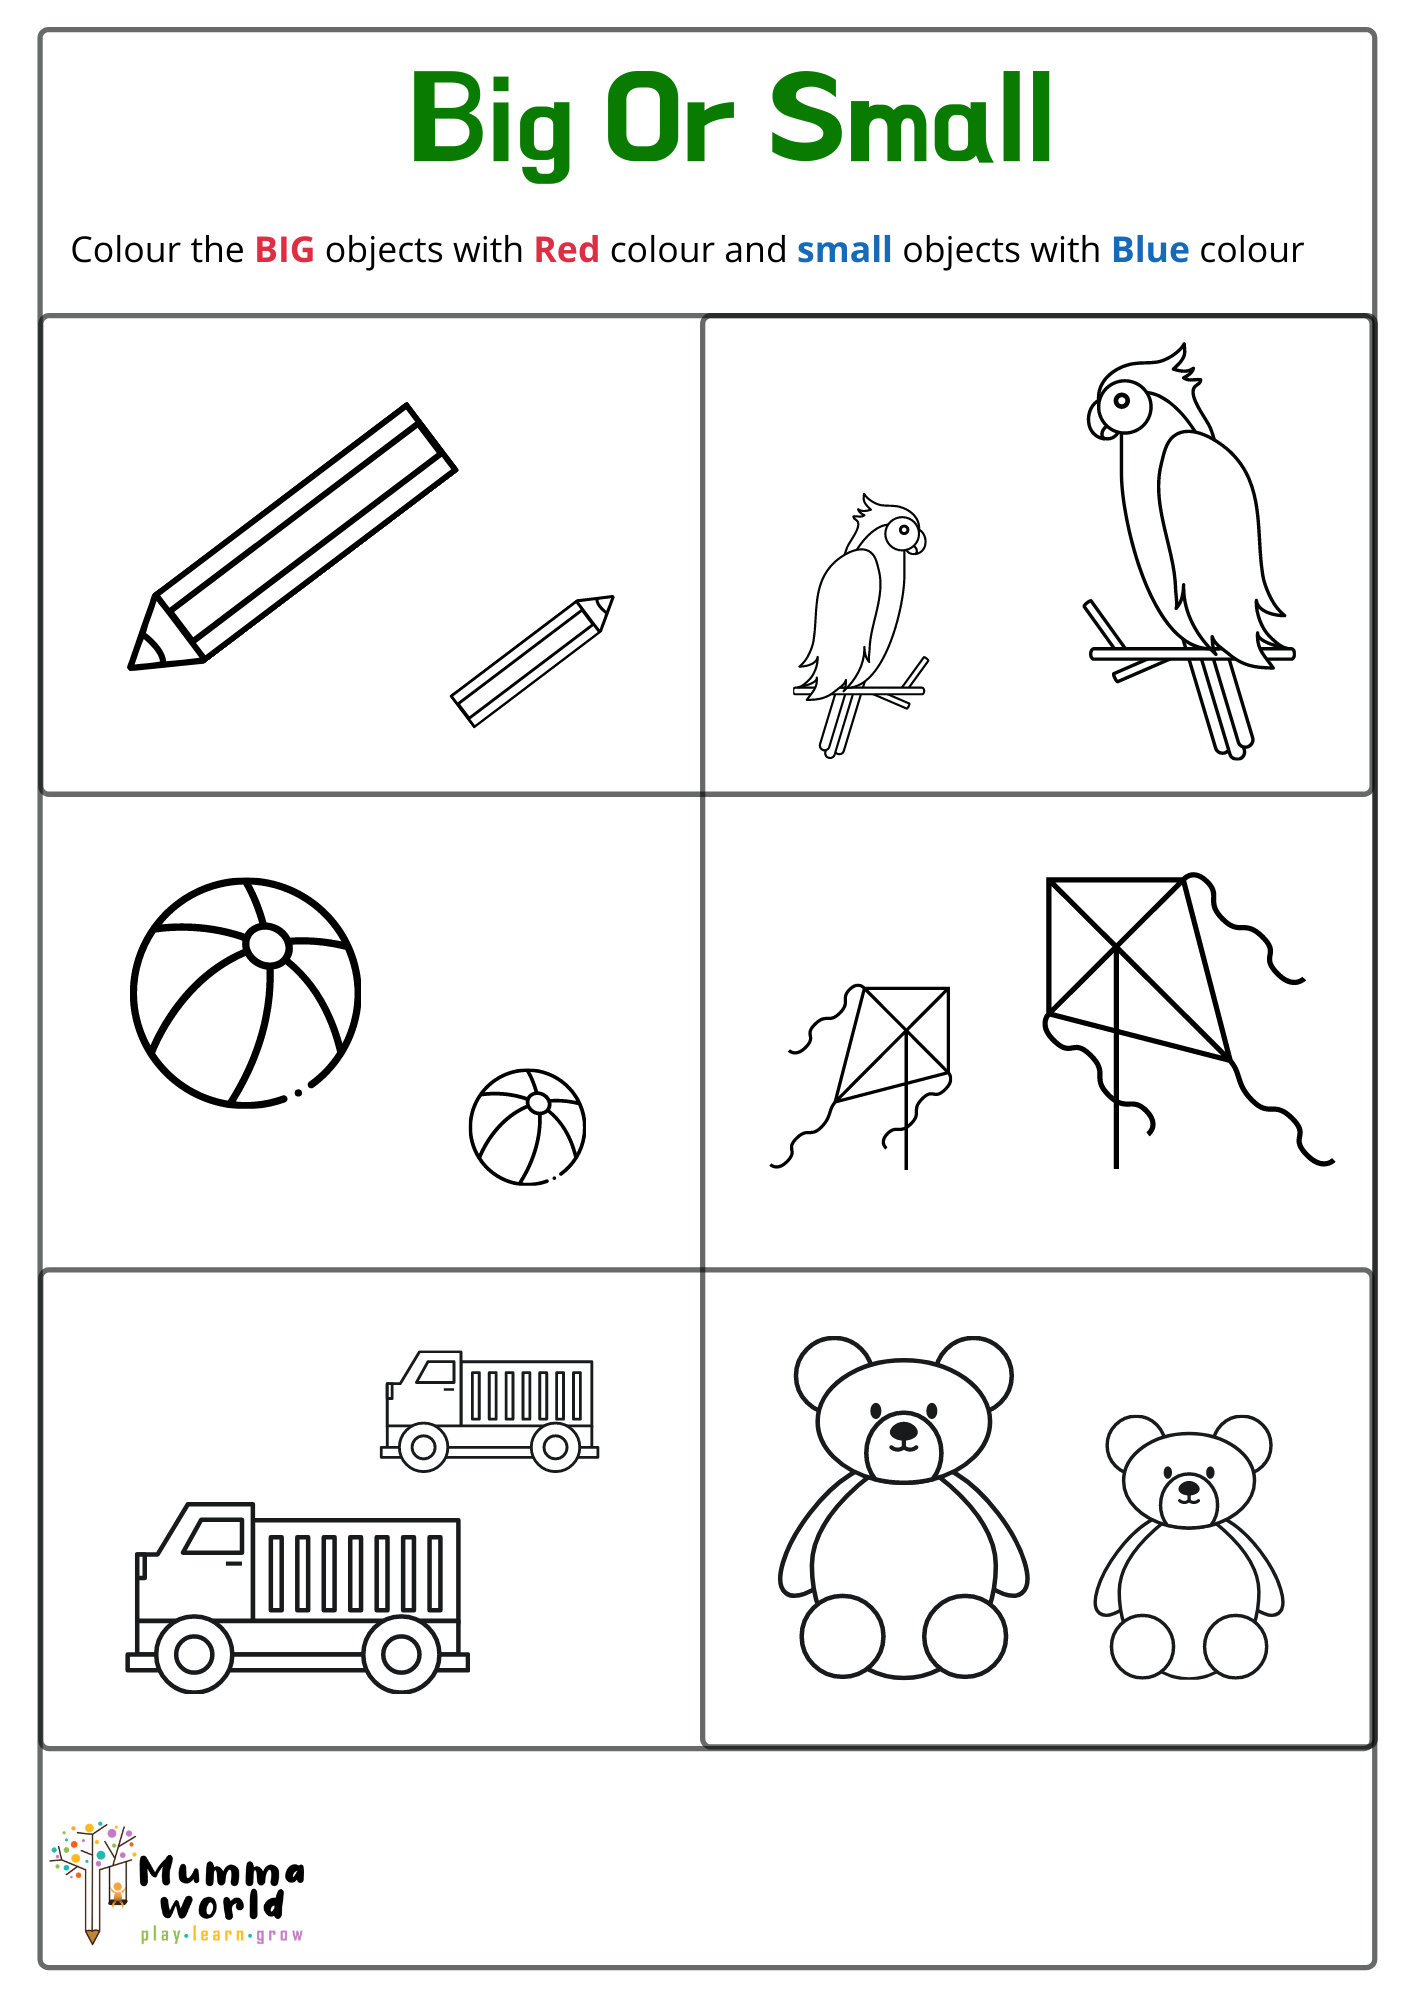 Big and Small Worksheet - Colouring Page - Preschooler Worksheet